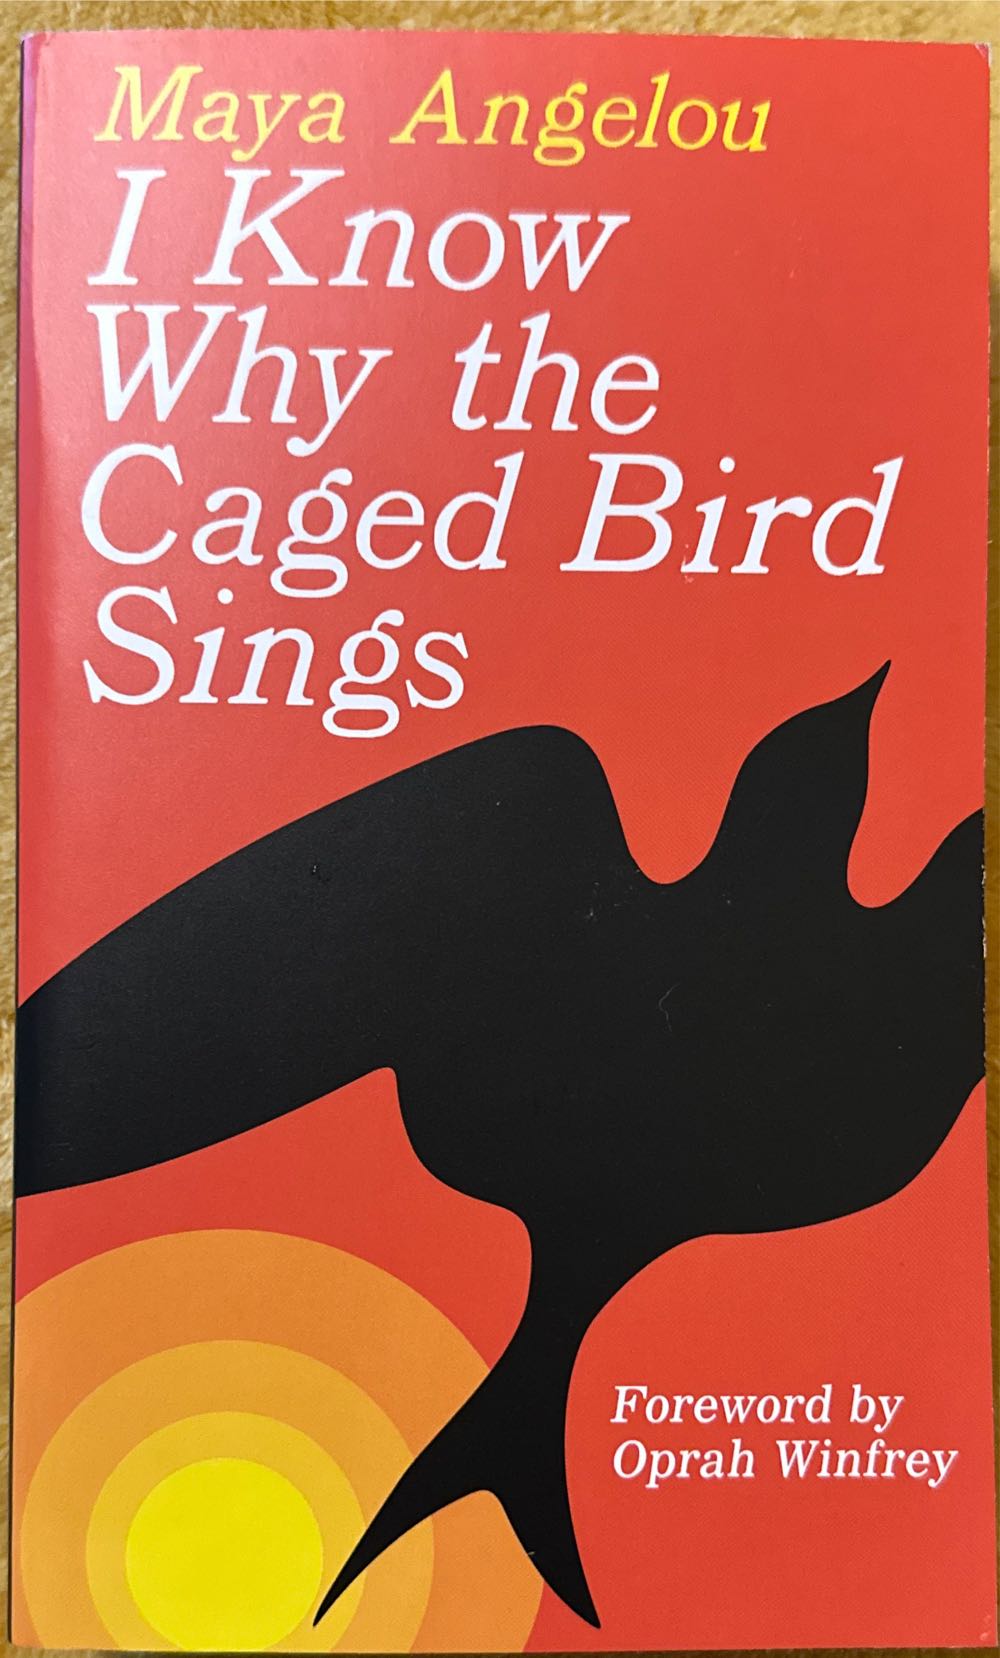 I Know Why The Caged Bird Sings - Maya Angelou (Ballantine Books - Paperback) book collectible [Barcode 9780345514400] - Main Image 3